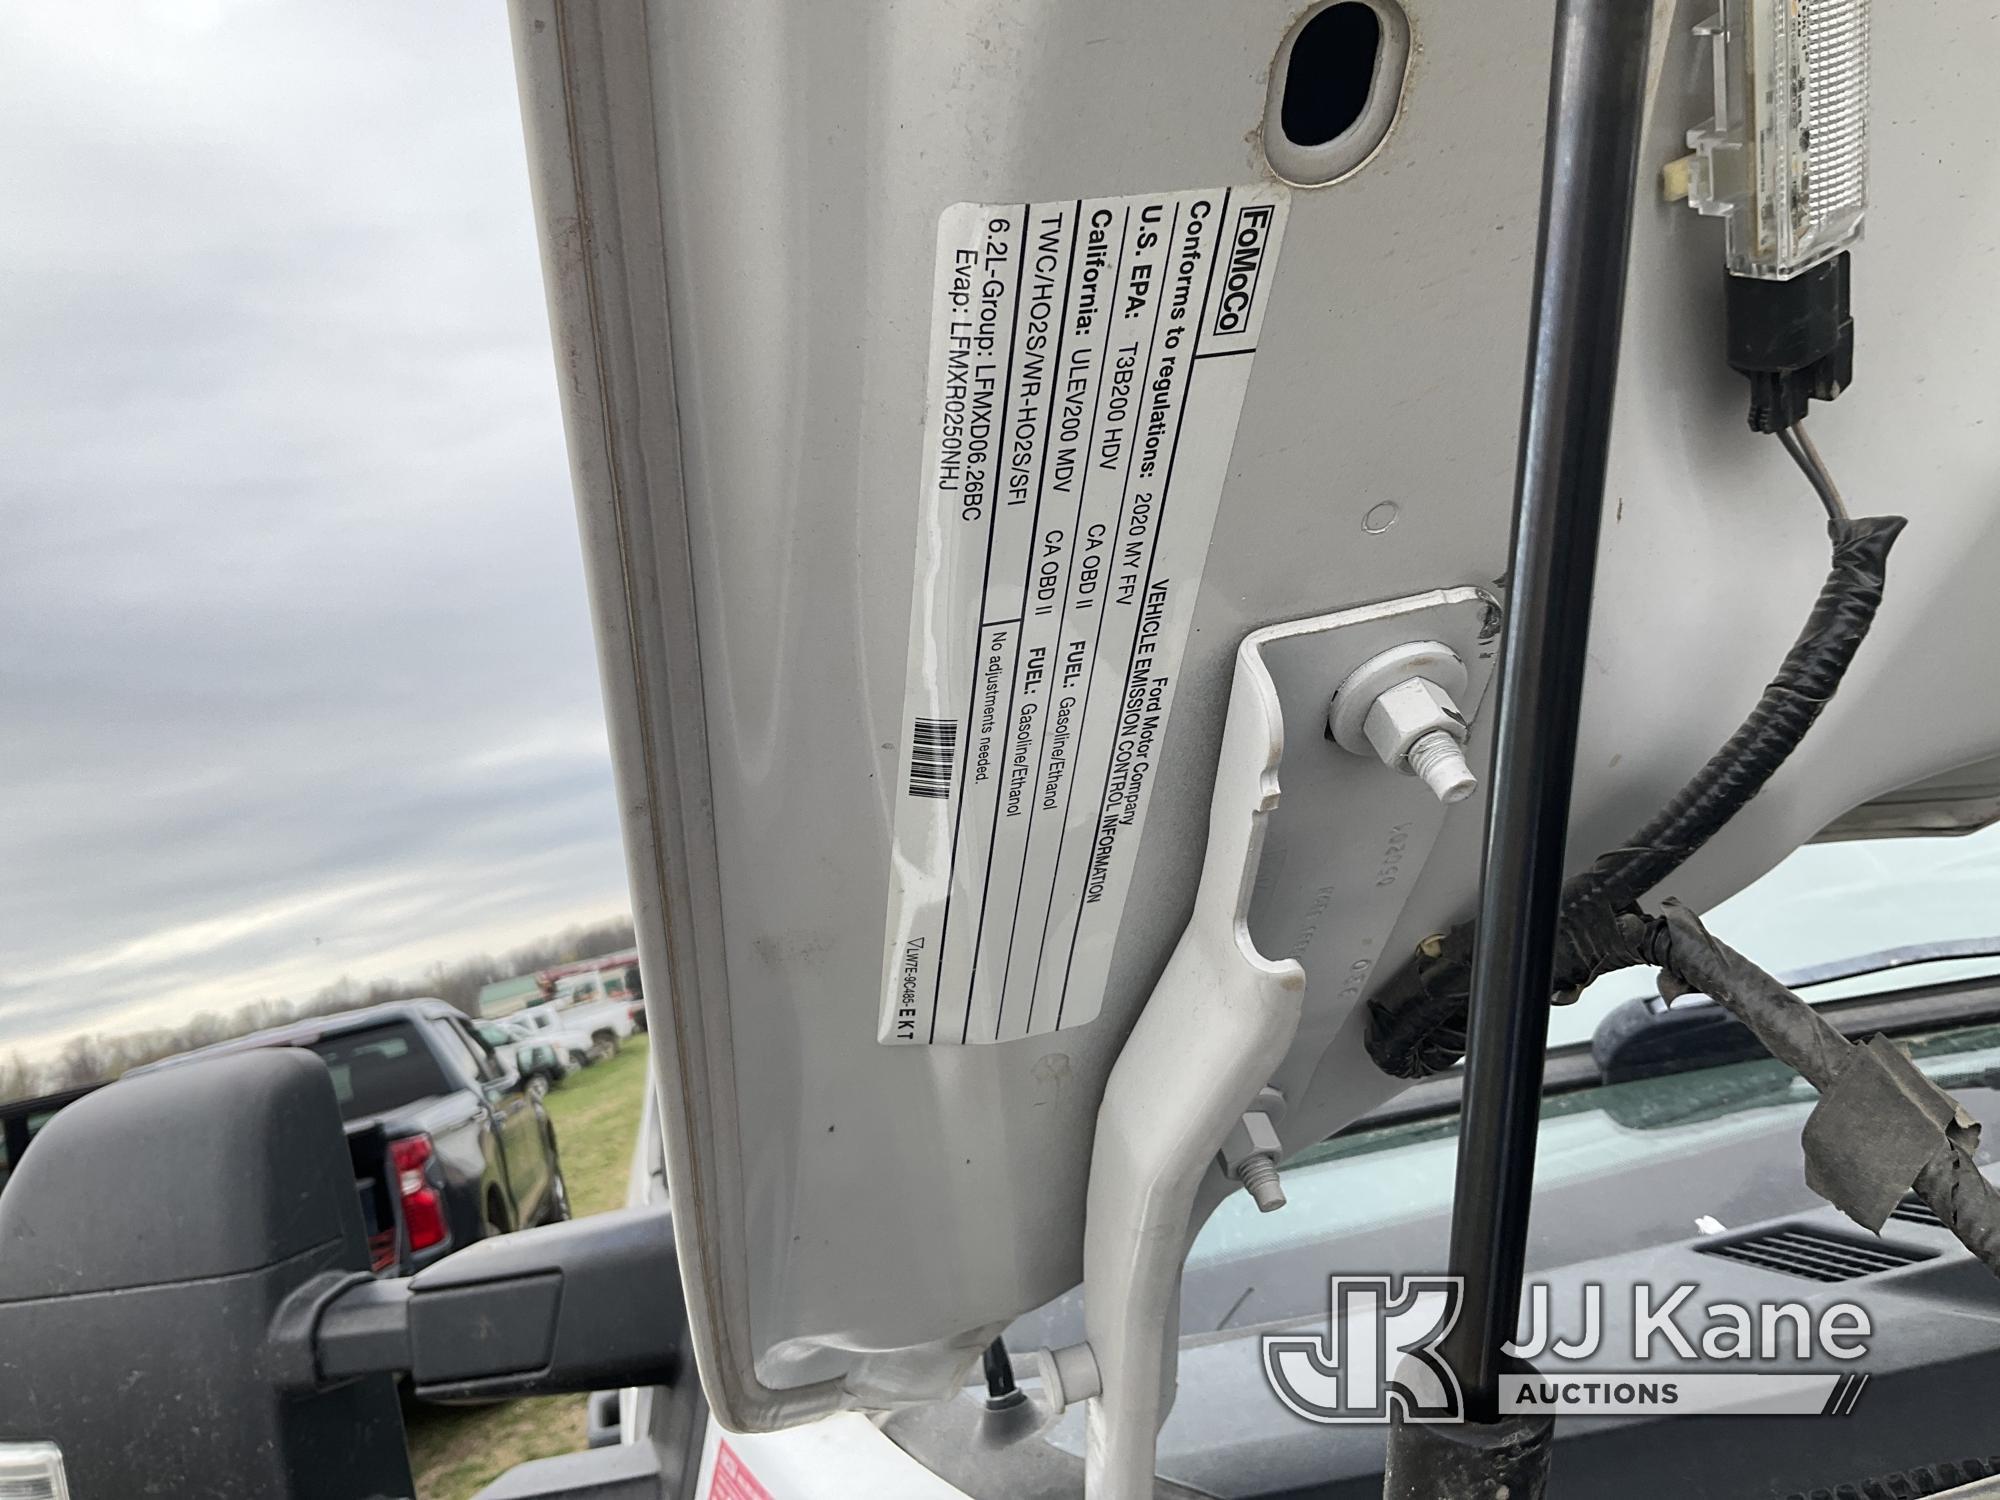 (Joplin, MO) 2020 Ford F250 4x4 Extended-Cab Pickup Truck Not Running, Condition Unknown. Per Seller